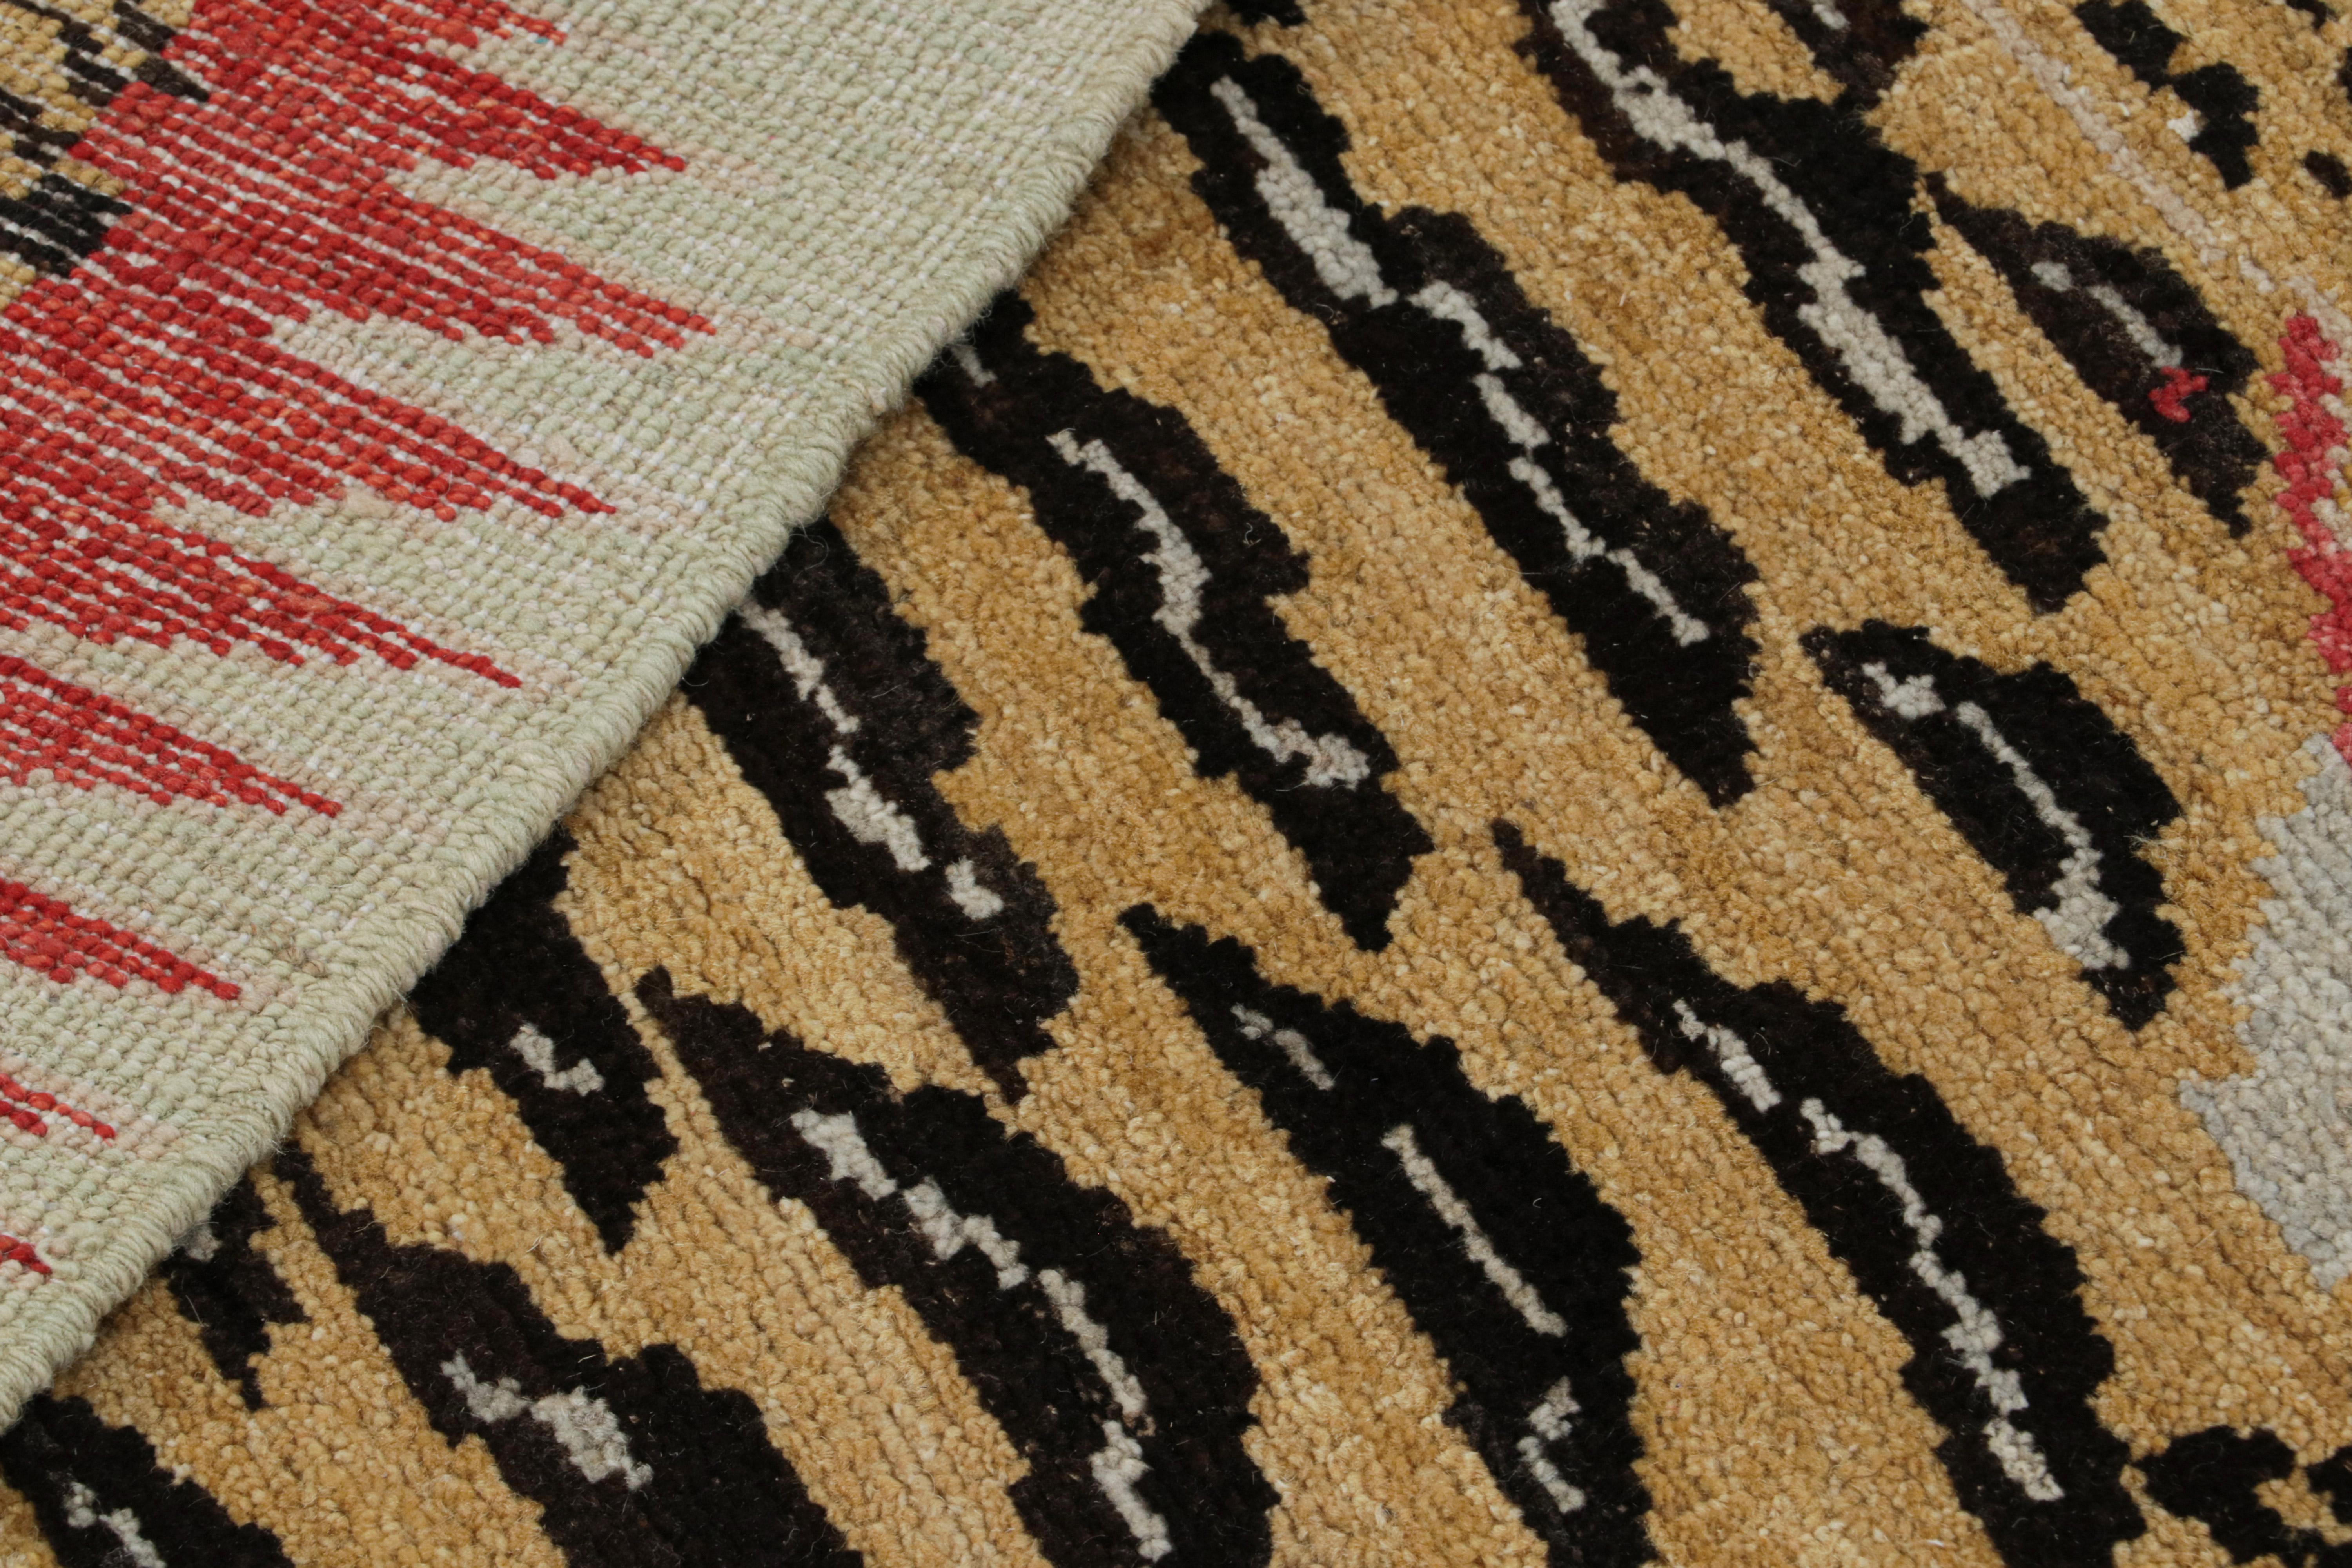 Wool Rug & Kilim Tibetan Tiger Skin Runner with Twin Pictorials For Sale